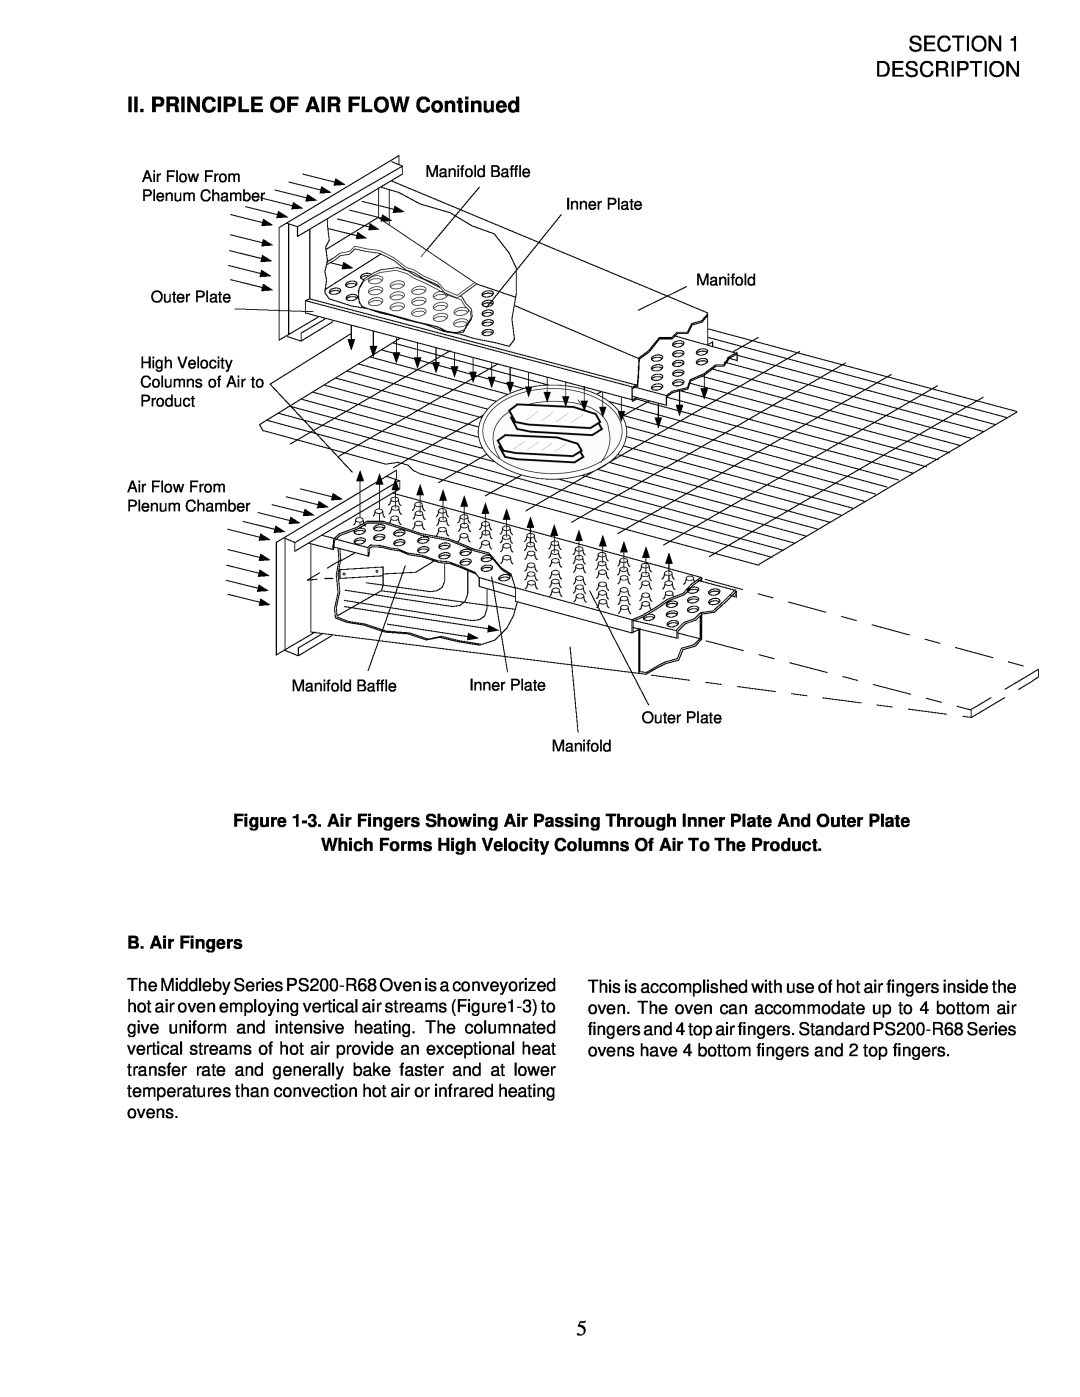 Middleby Marshall PS200-R68 installation manual II. PRINCIPLE OF AIR FLOW Continued, Section Description, B. Air Fingers 